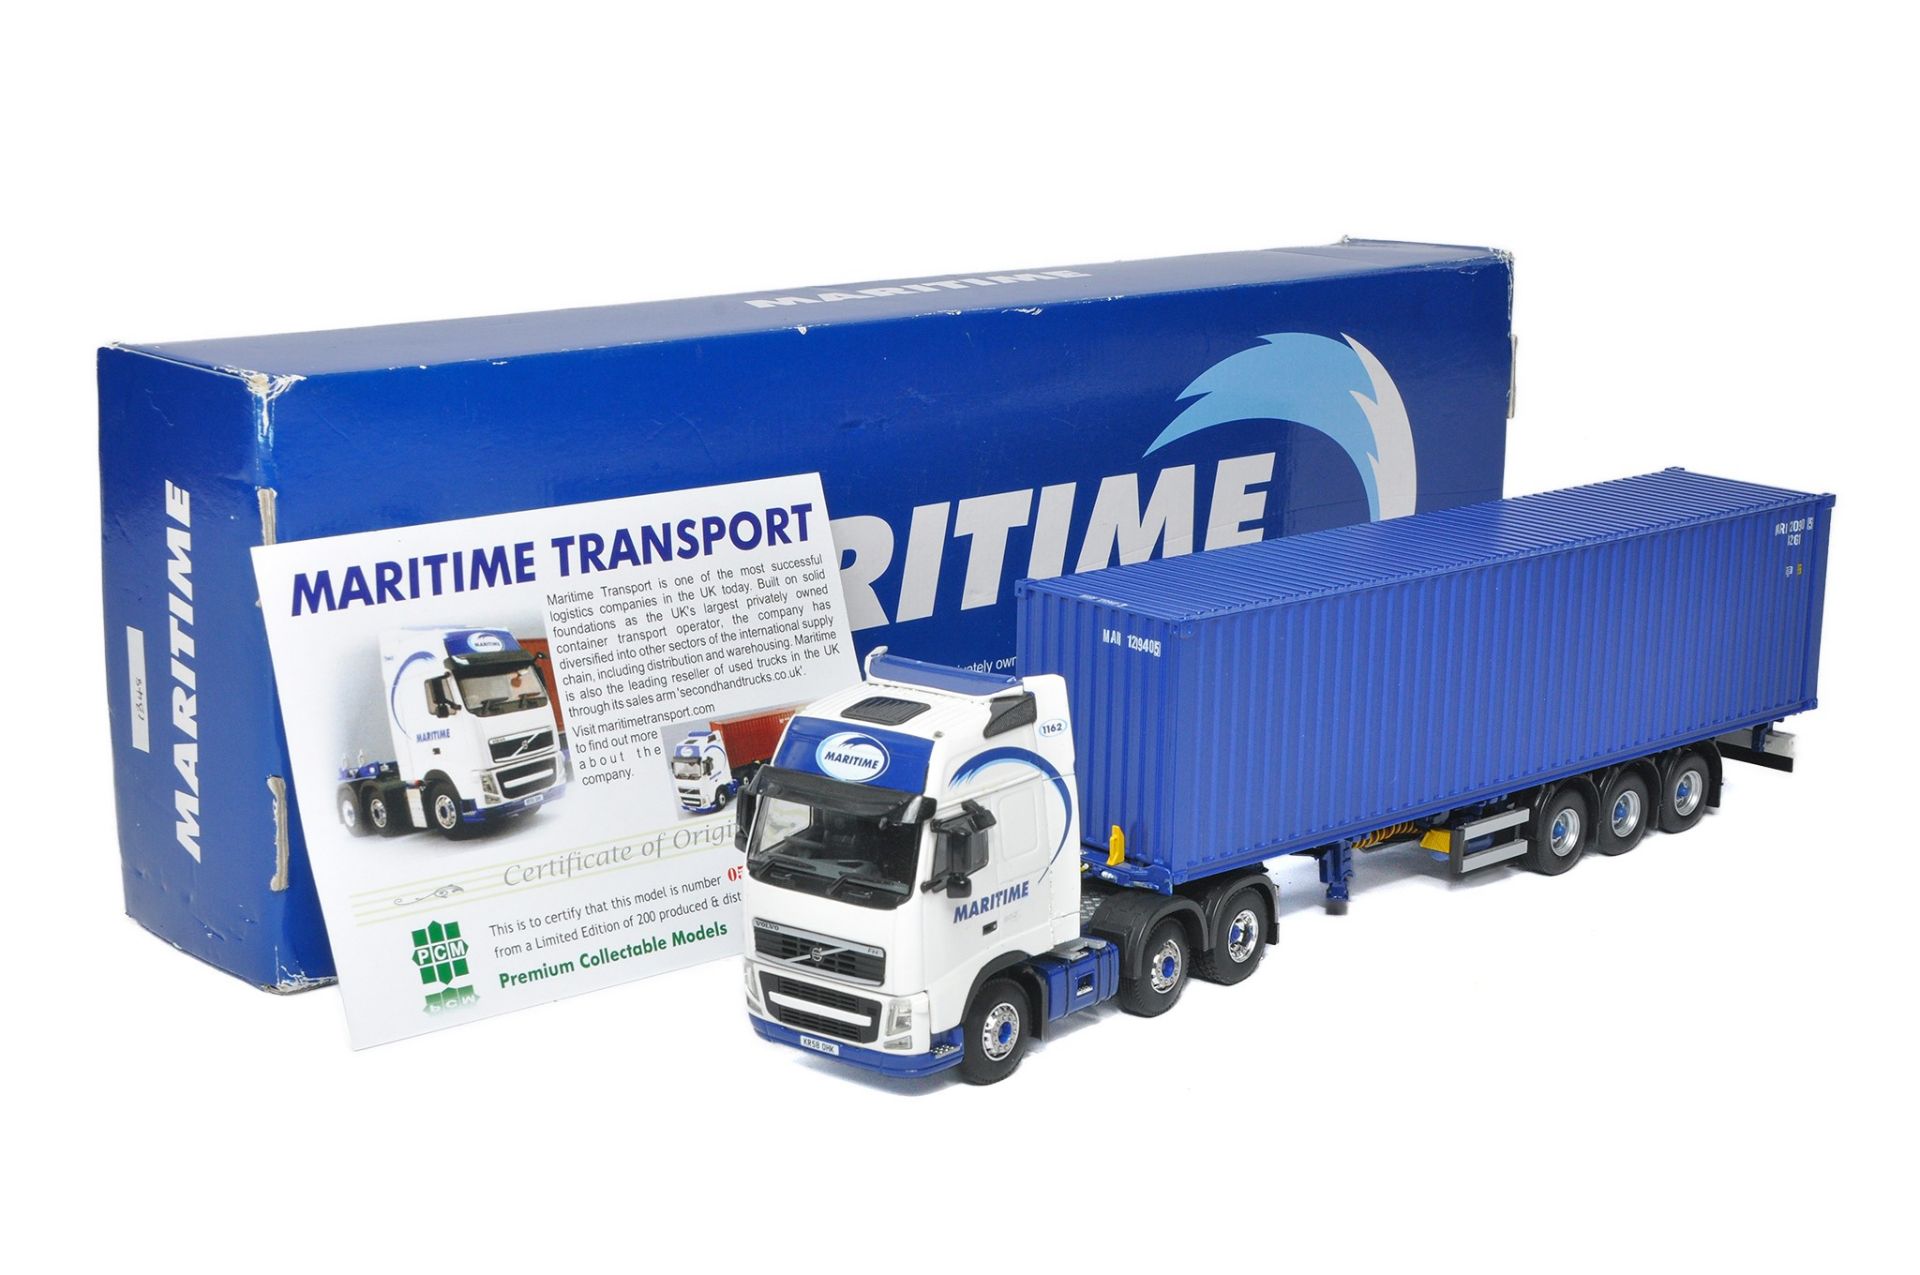 Tekno 1/50 diecast model truck issue comprising Volvo Container Trailer in the livery of Maritime